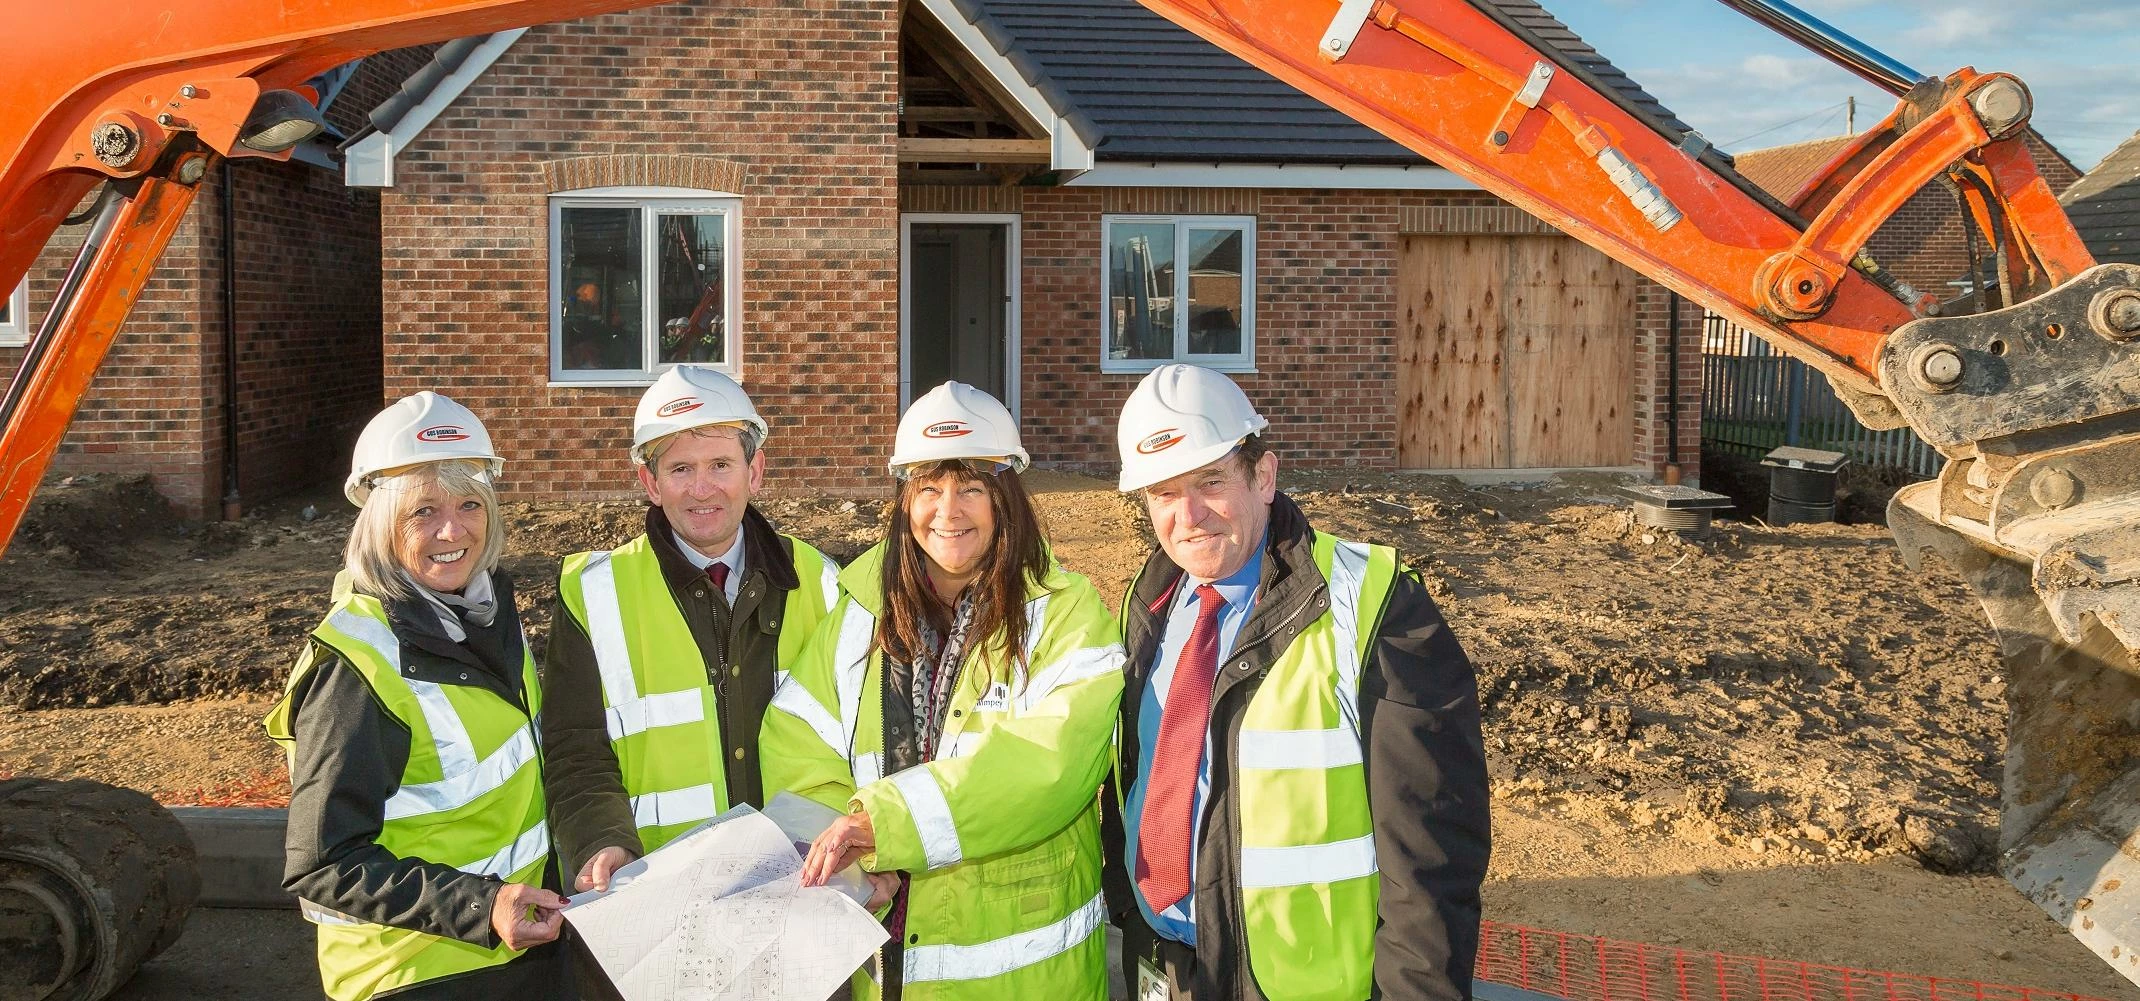 (L-R) Cllr Barbara Armstrong; Keith Tallintire, Director of Resources with Derwentside Homes; Moya J